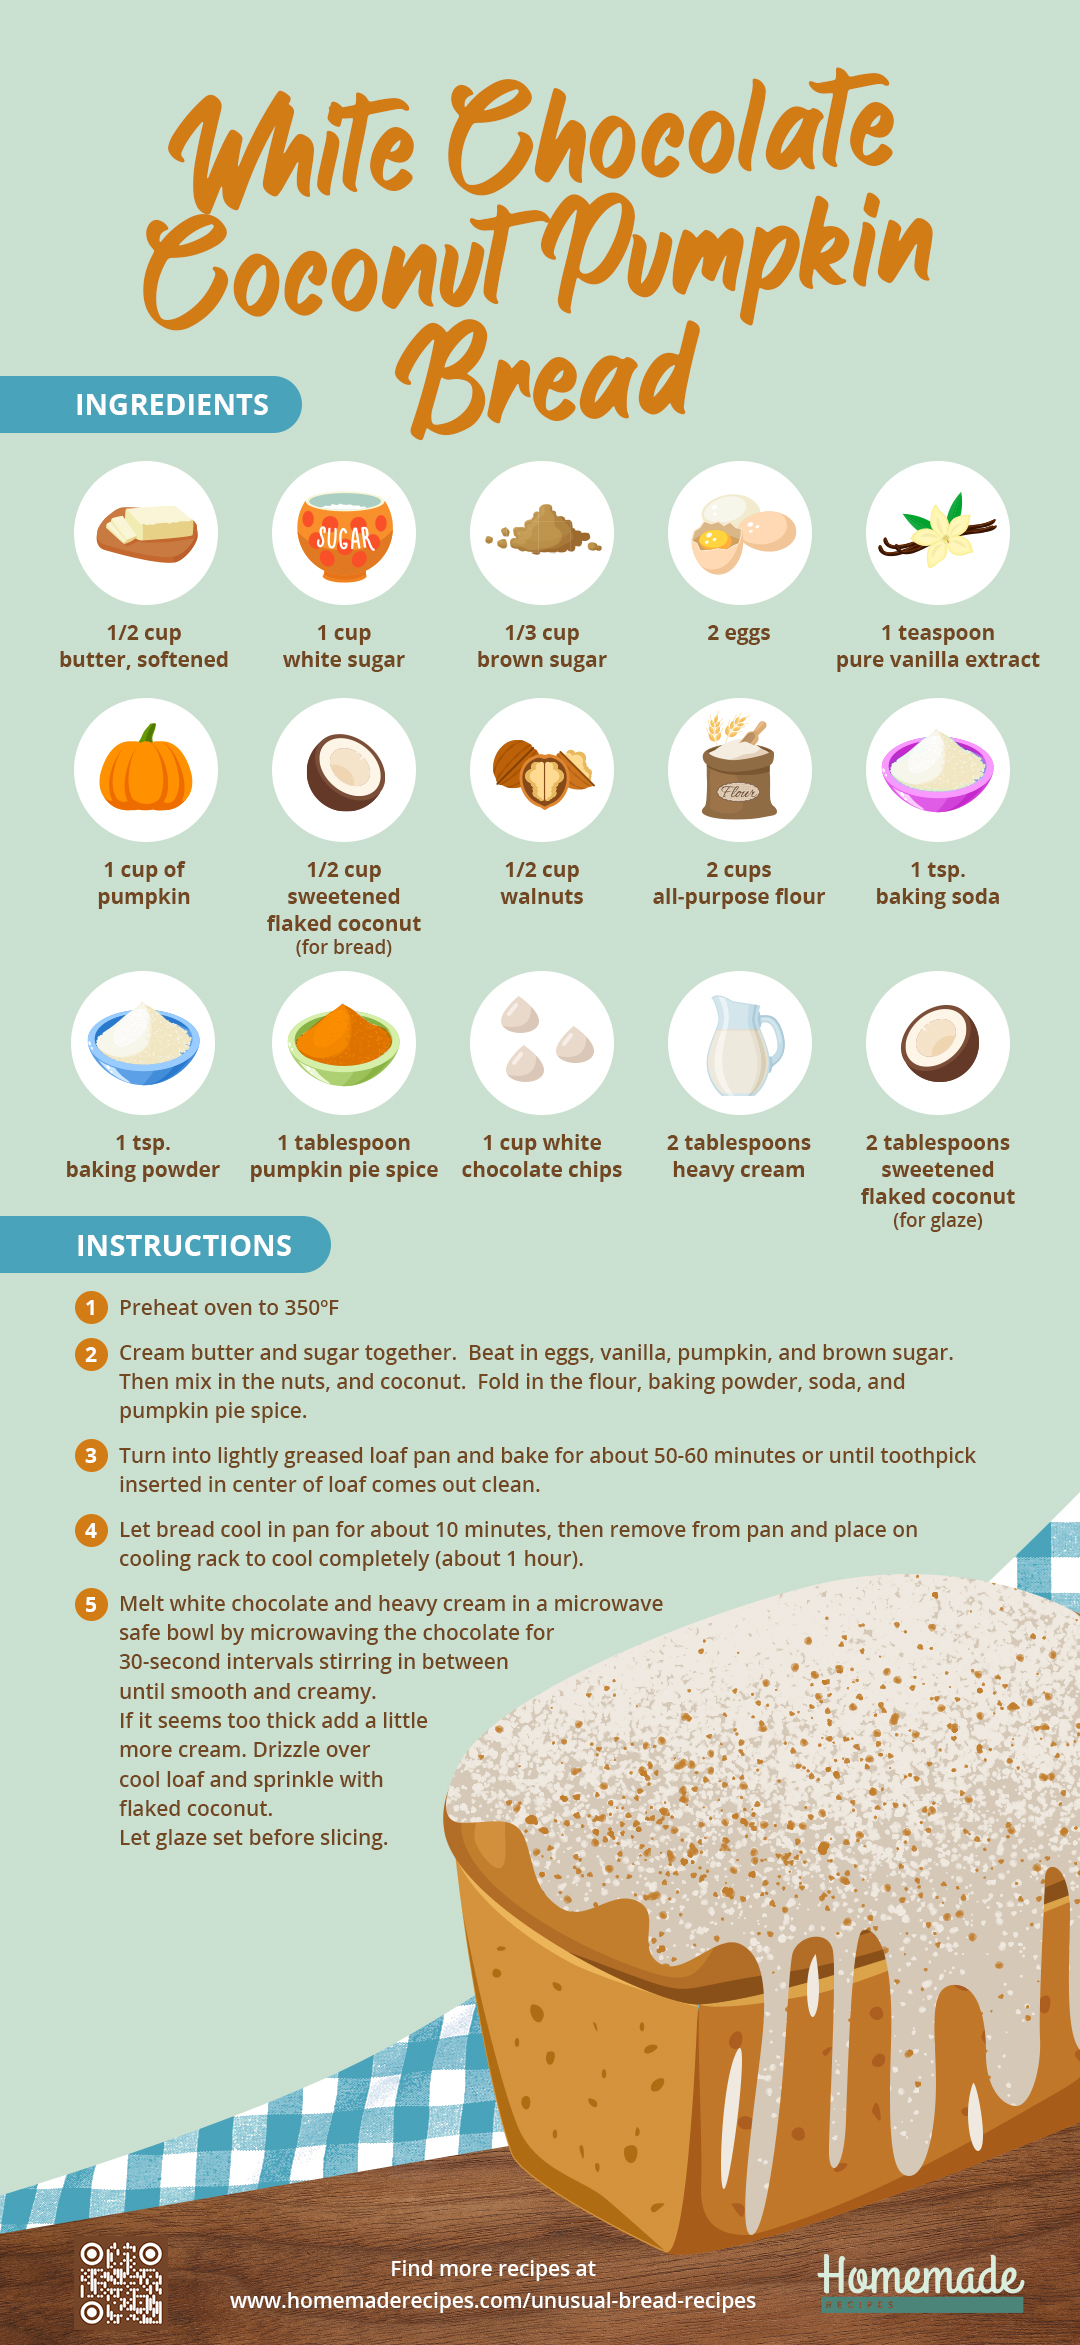 White Chocolate Coconut Pumpkin Bread | Unusual Bread Recipes You Have To Try [INFOGRAPHIC]